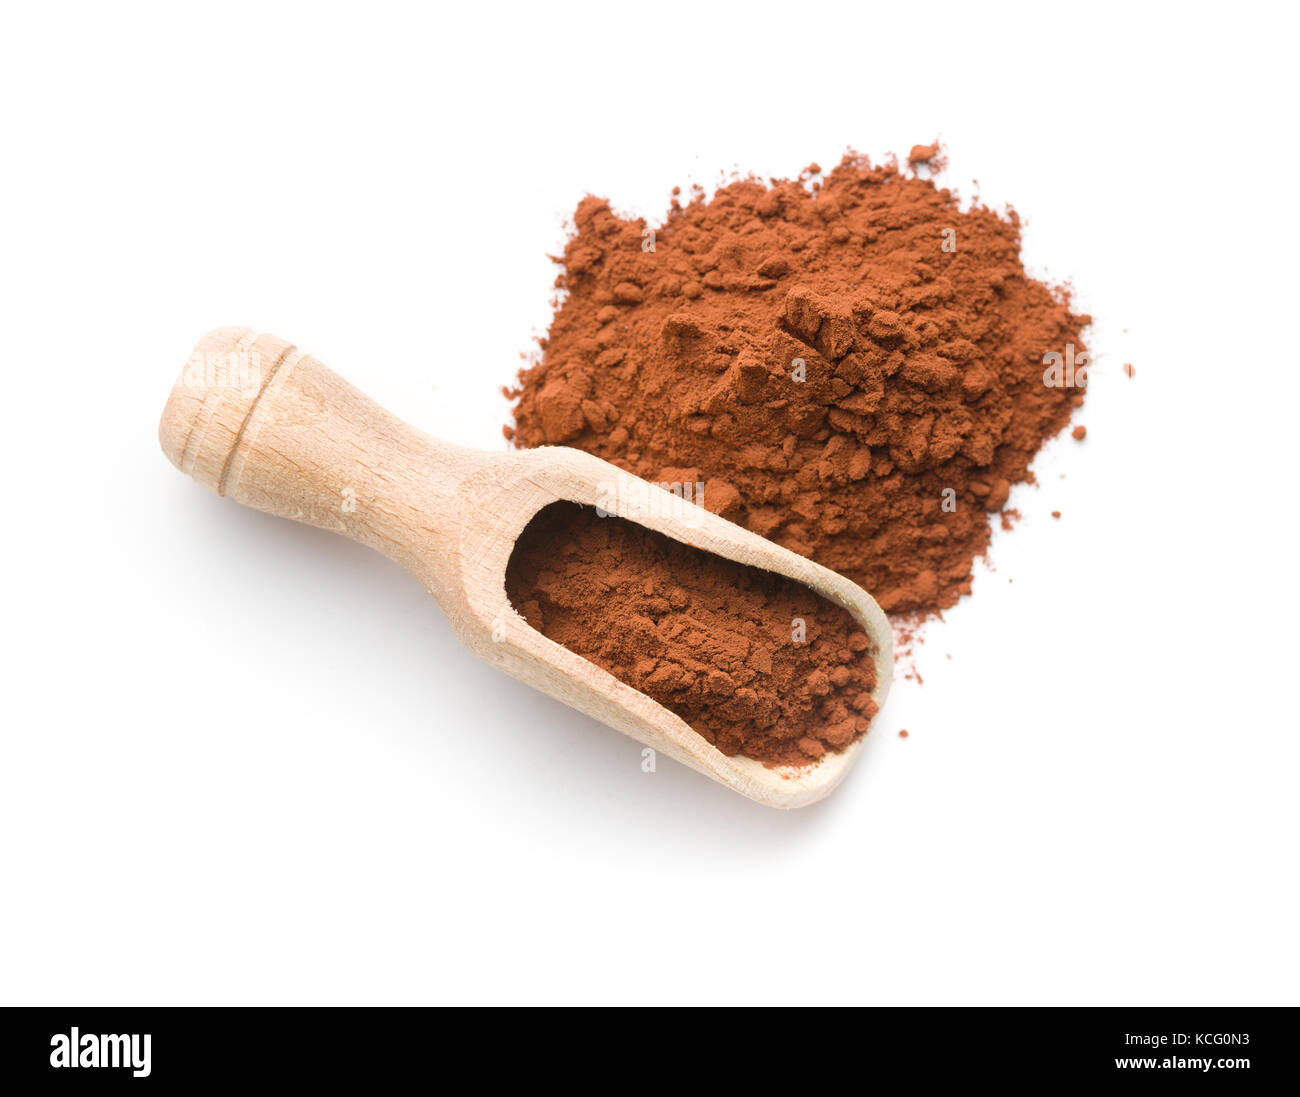 Tasty cocoa powder in wooden scoop isolated on white background. Stock Photo